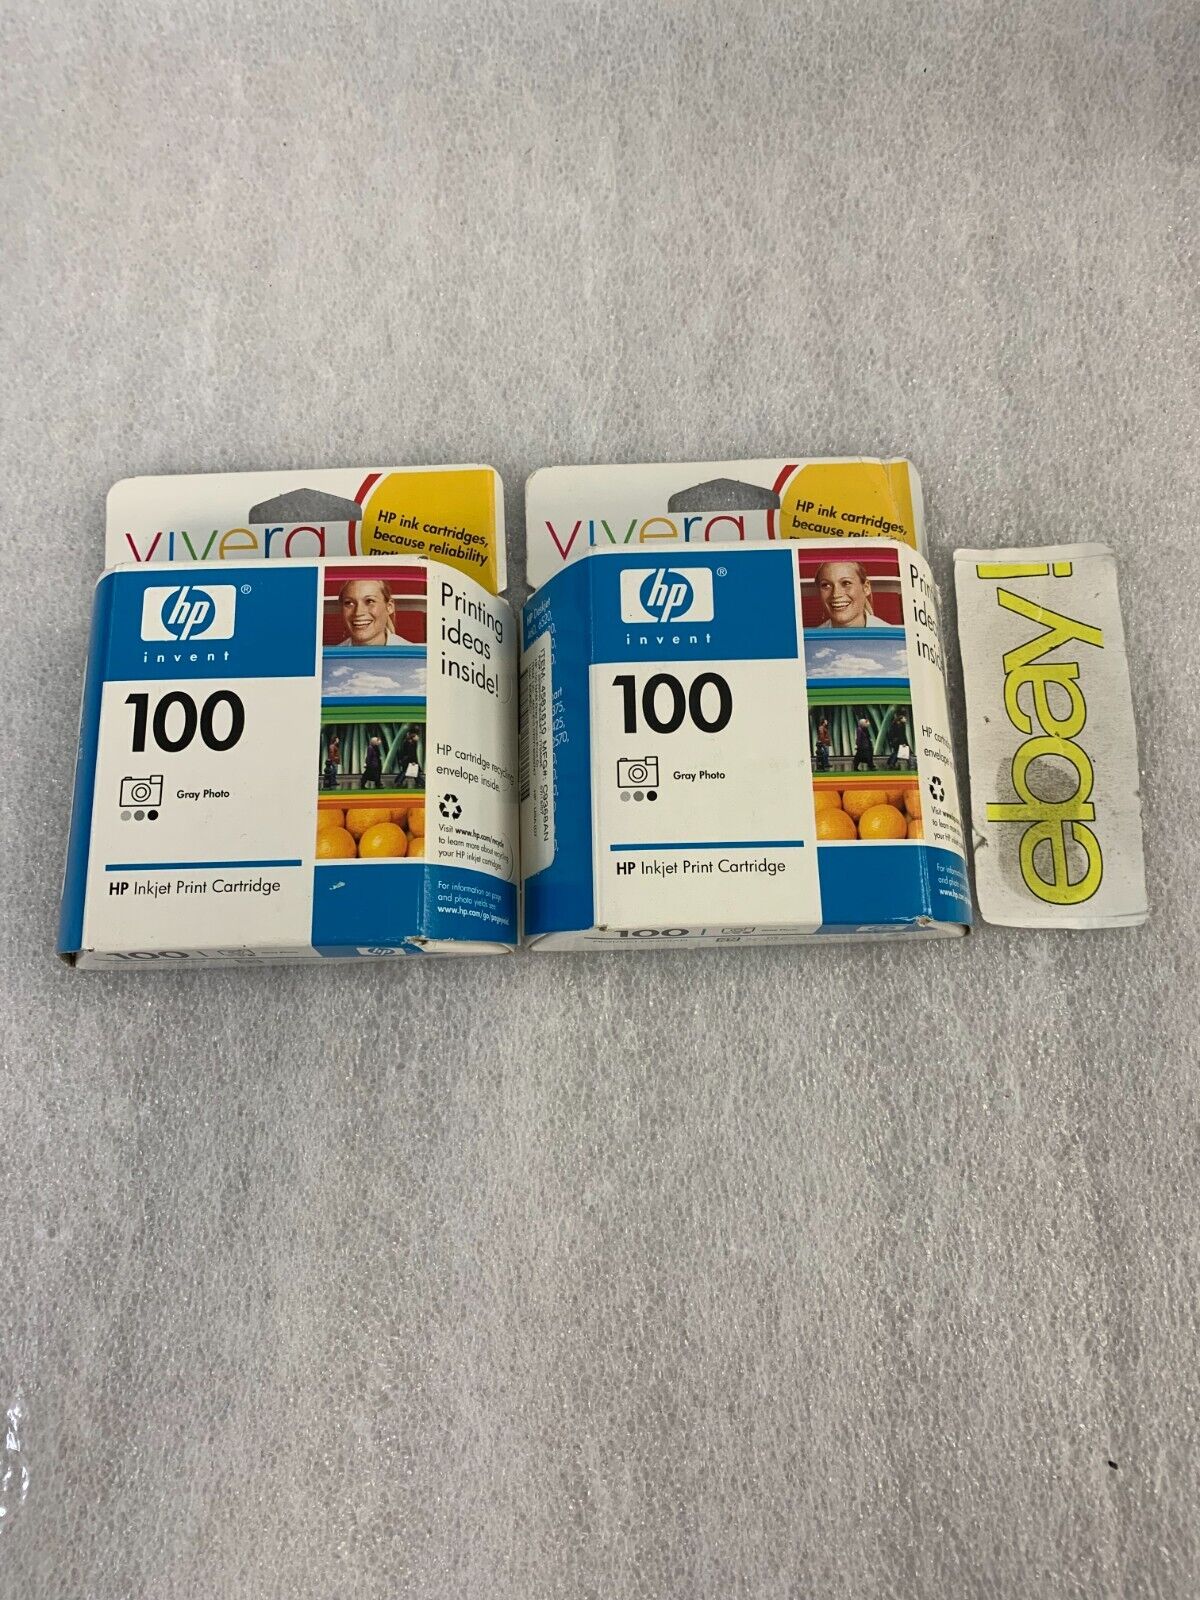 SEALED Lot of 2 HP Vivera 100 Ink Gray Photo Ink Cartridge Exp 7/08 